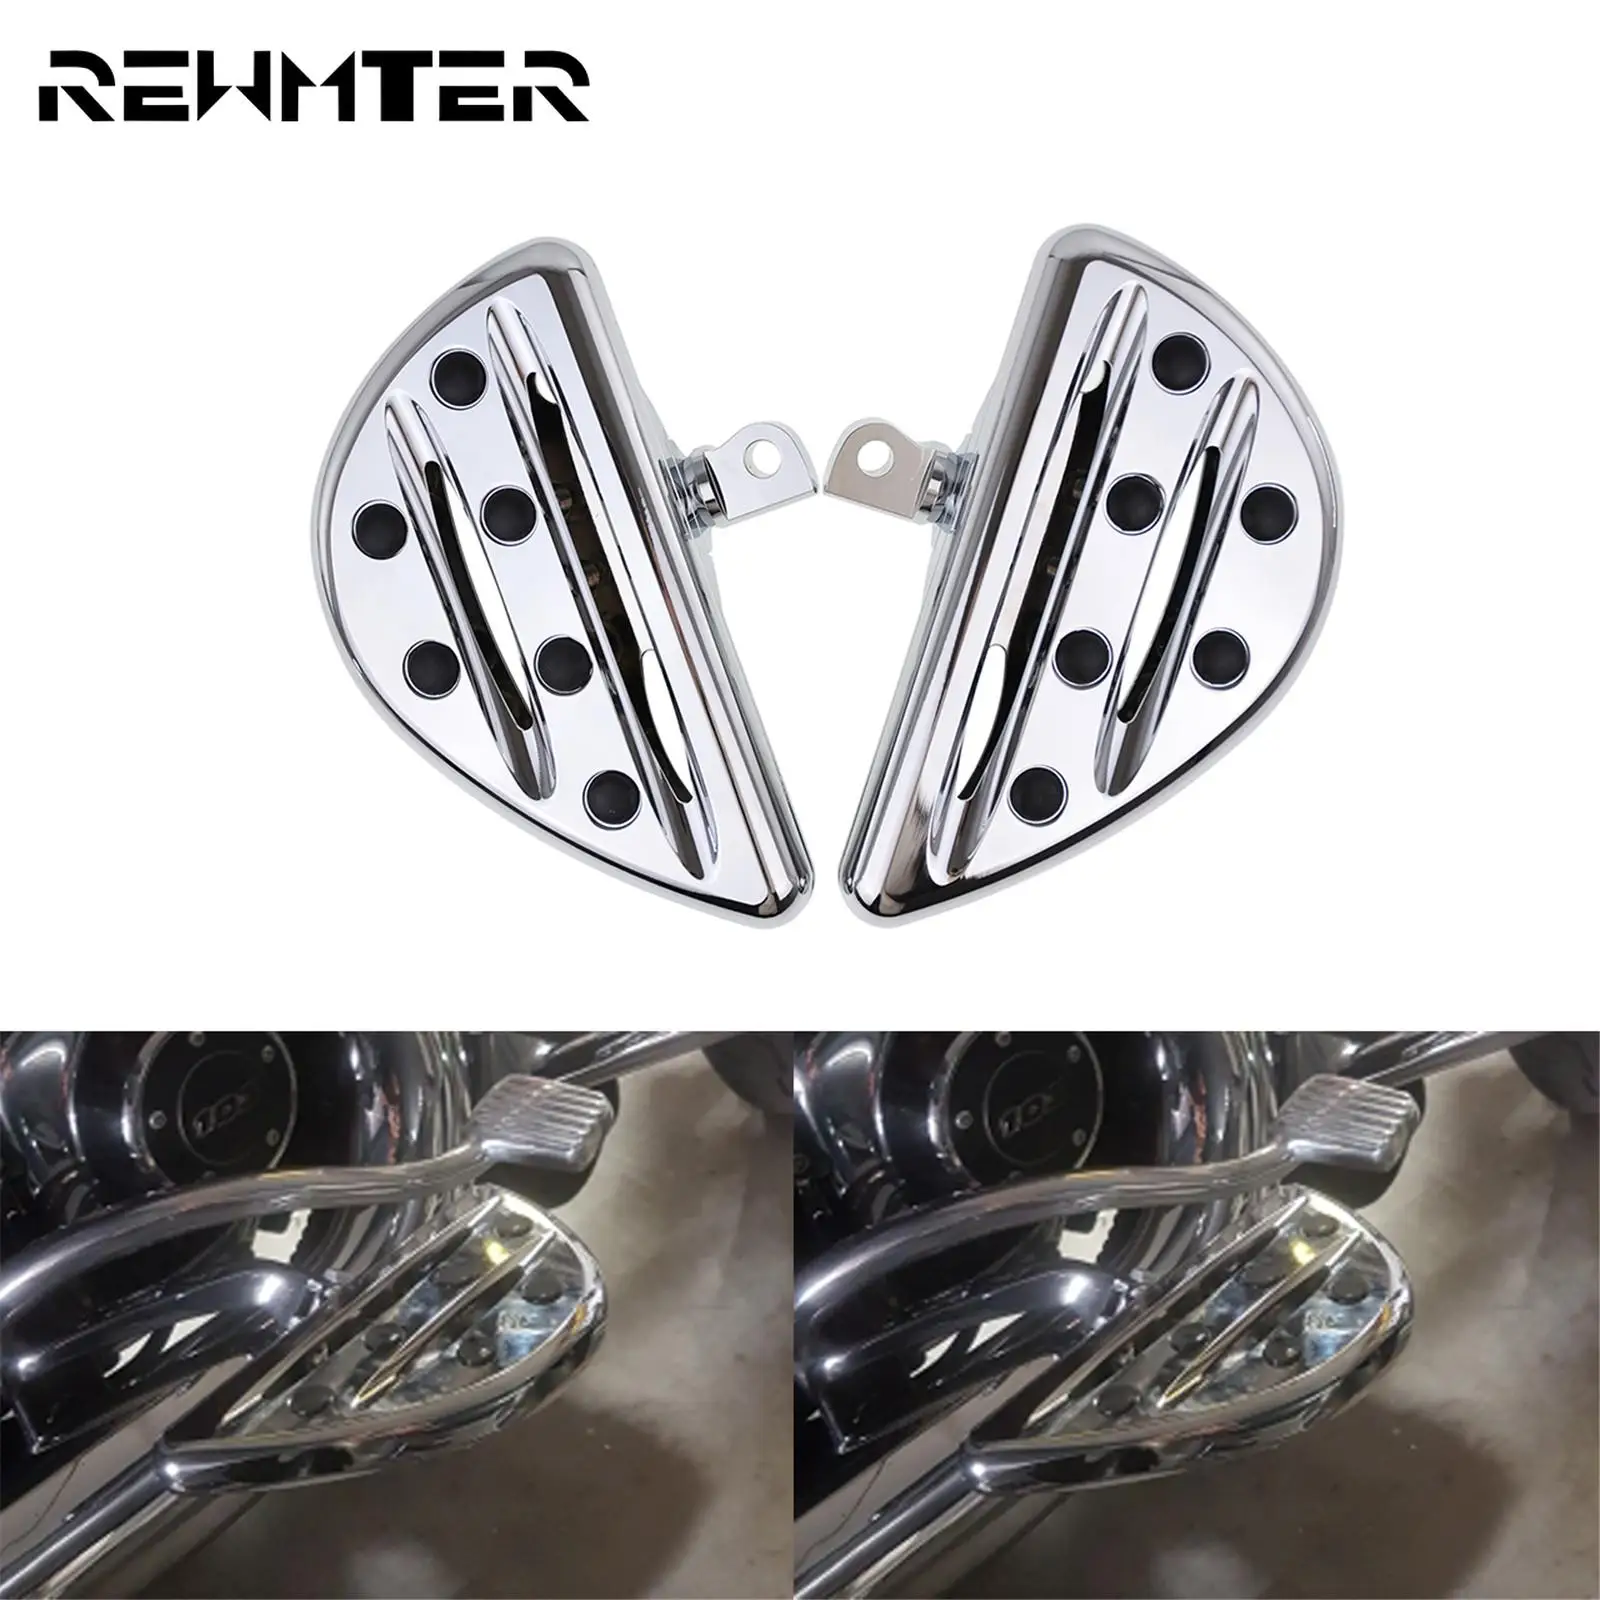 

Motorcycle Passenger Pedal Floorboards Footboard Chrome Footpegs Footrest For Harley Sportster XL 883 Softail Dyna Touring FXST